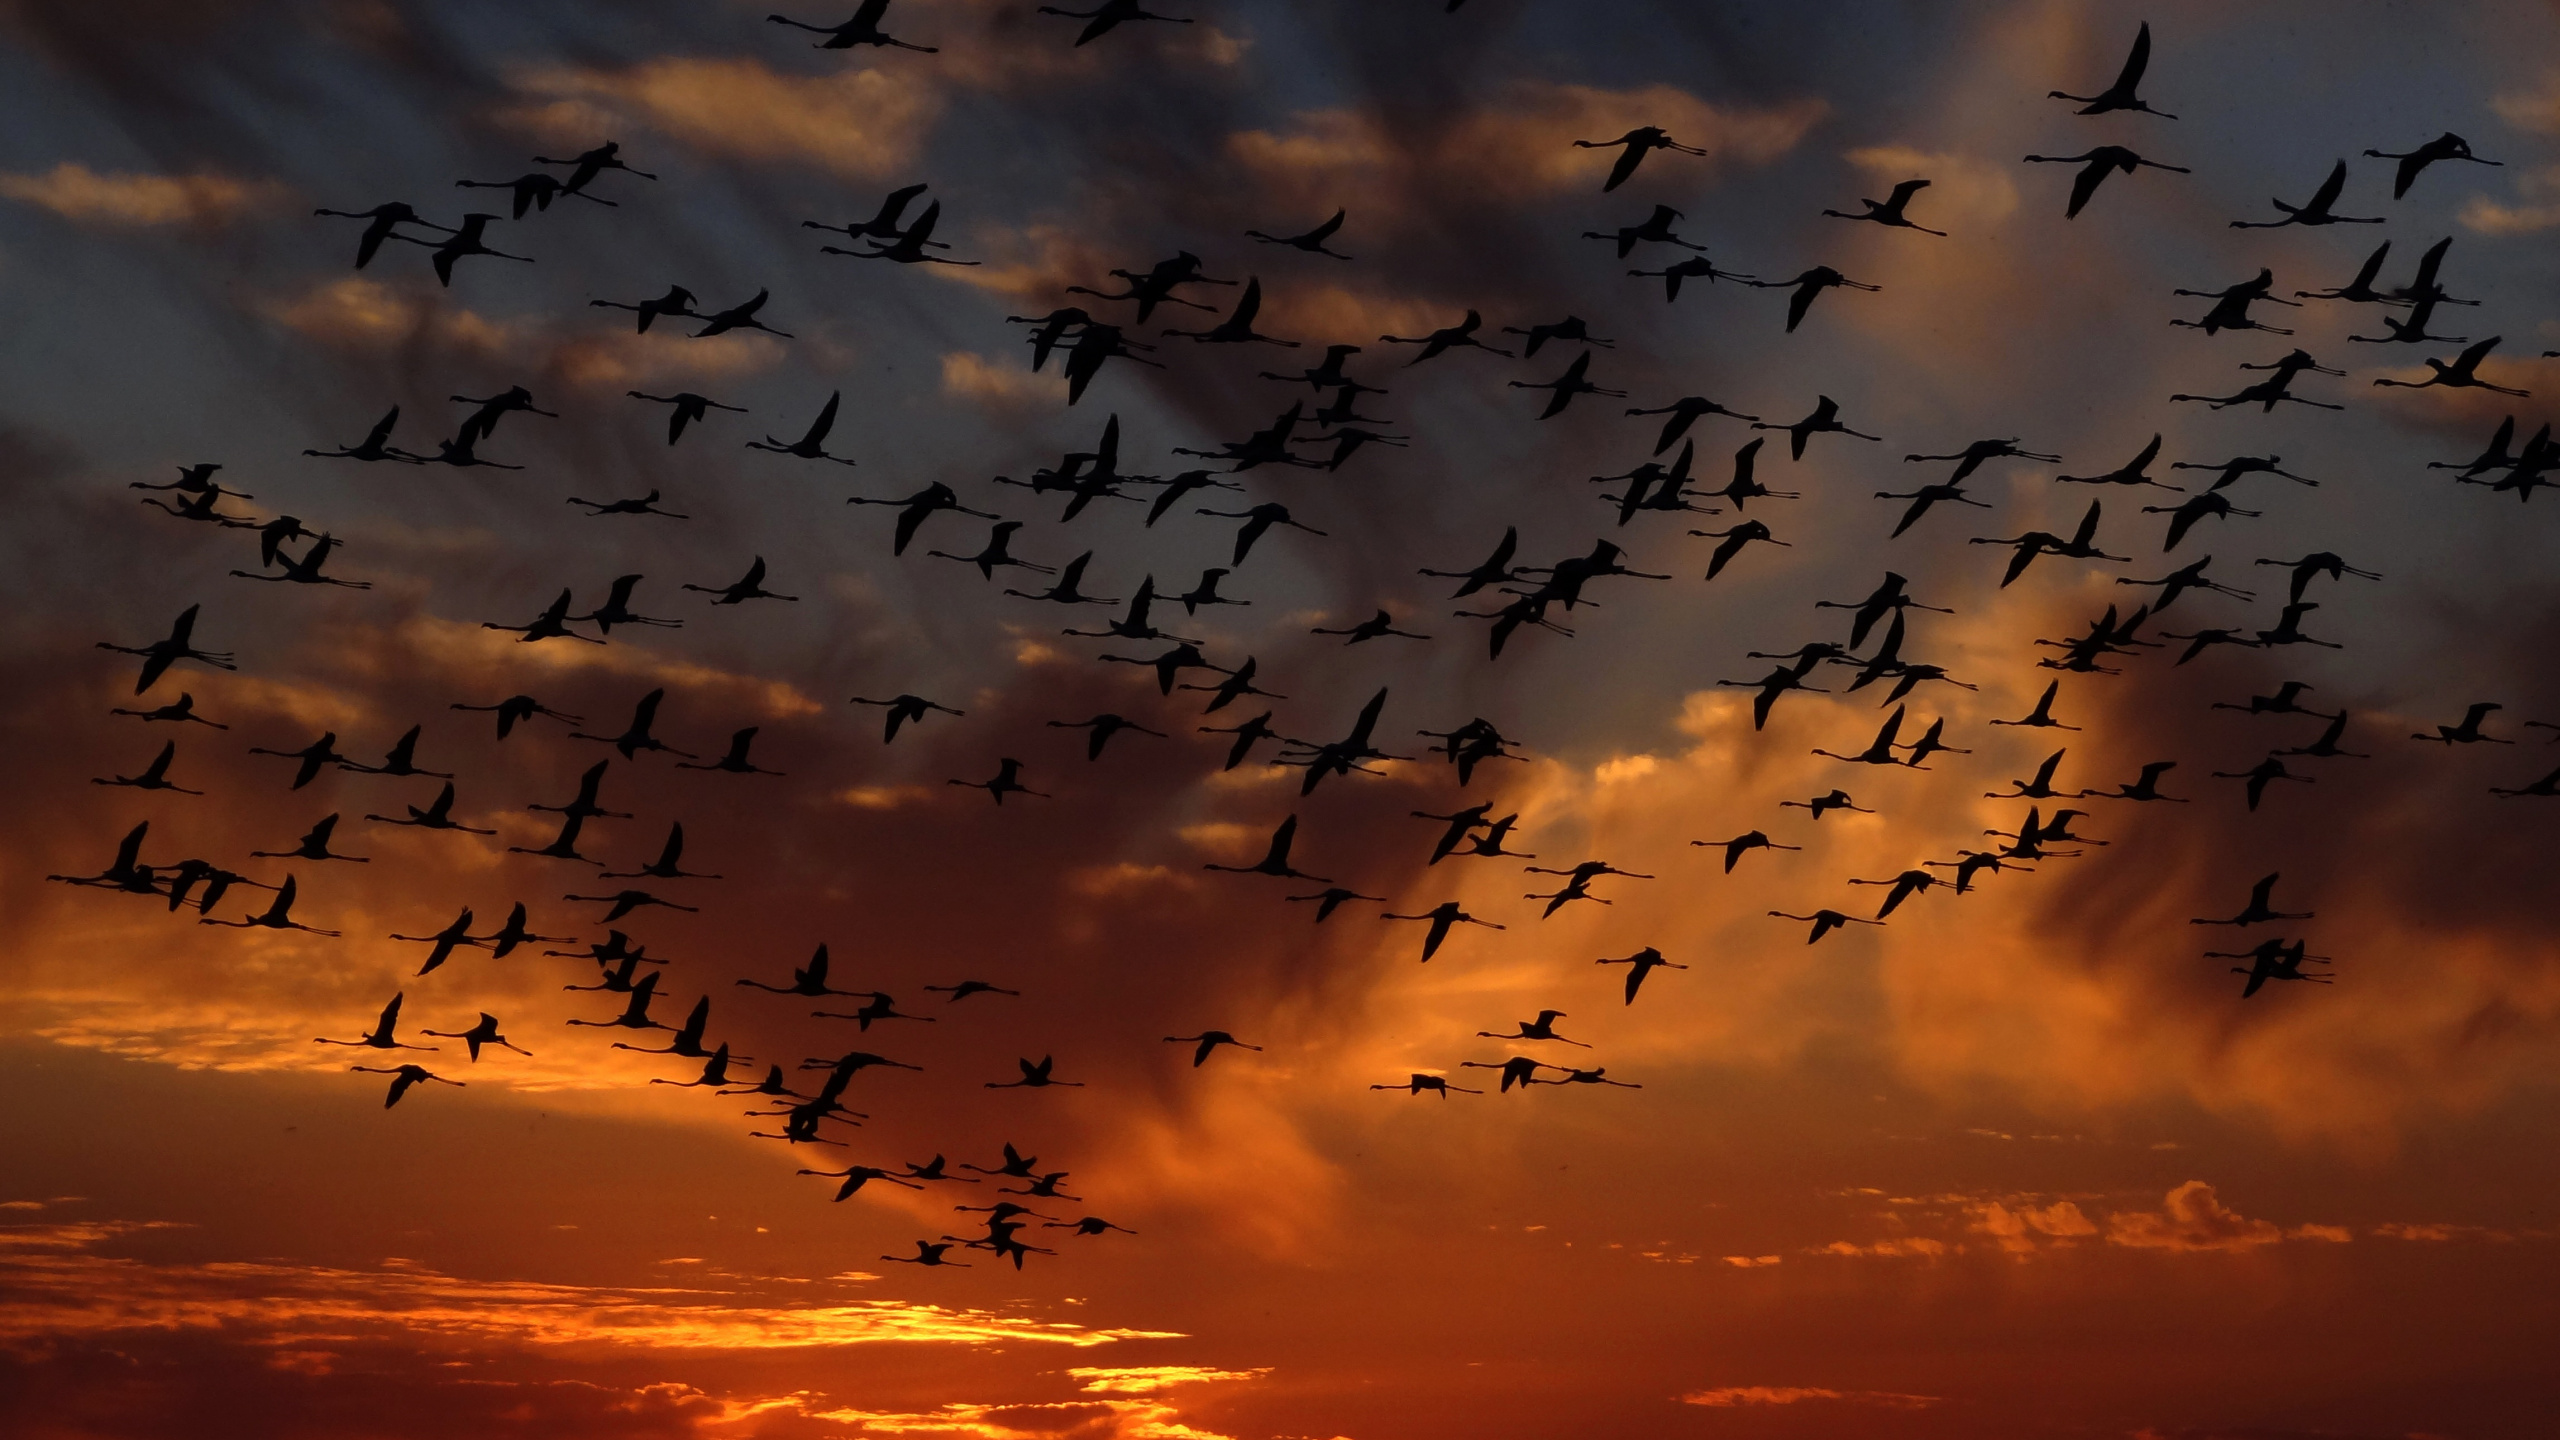 Silhouette of Flock of Birds Flying During Sunset. Wallpaper in 2560x1440 Resolution